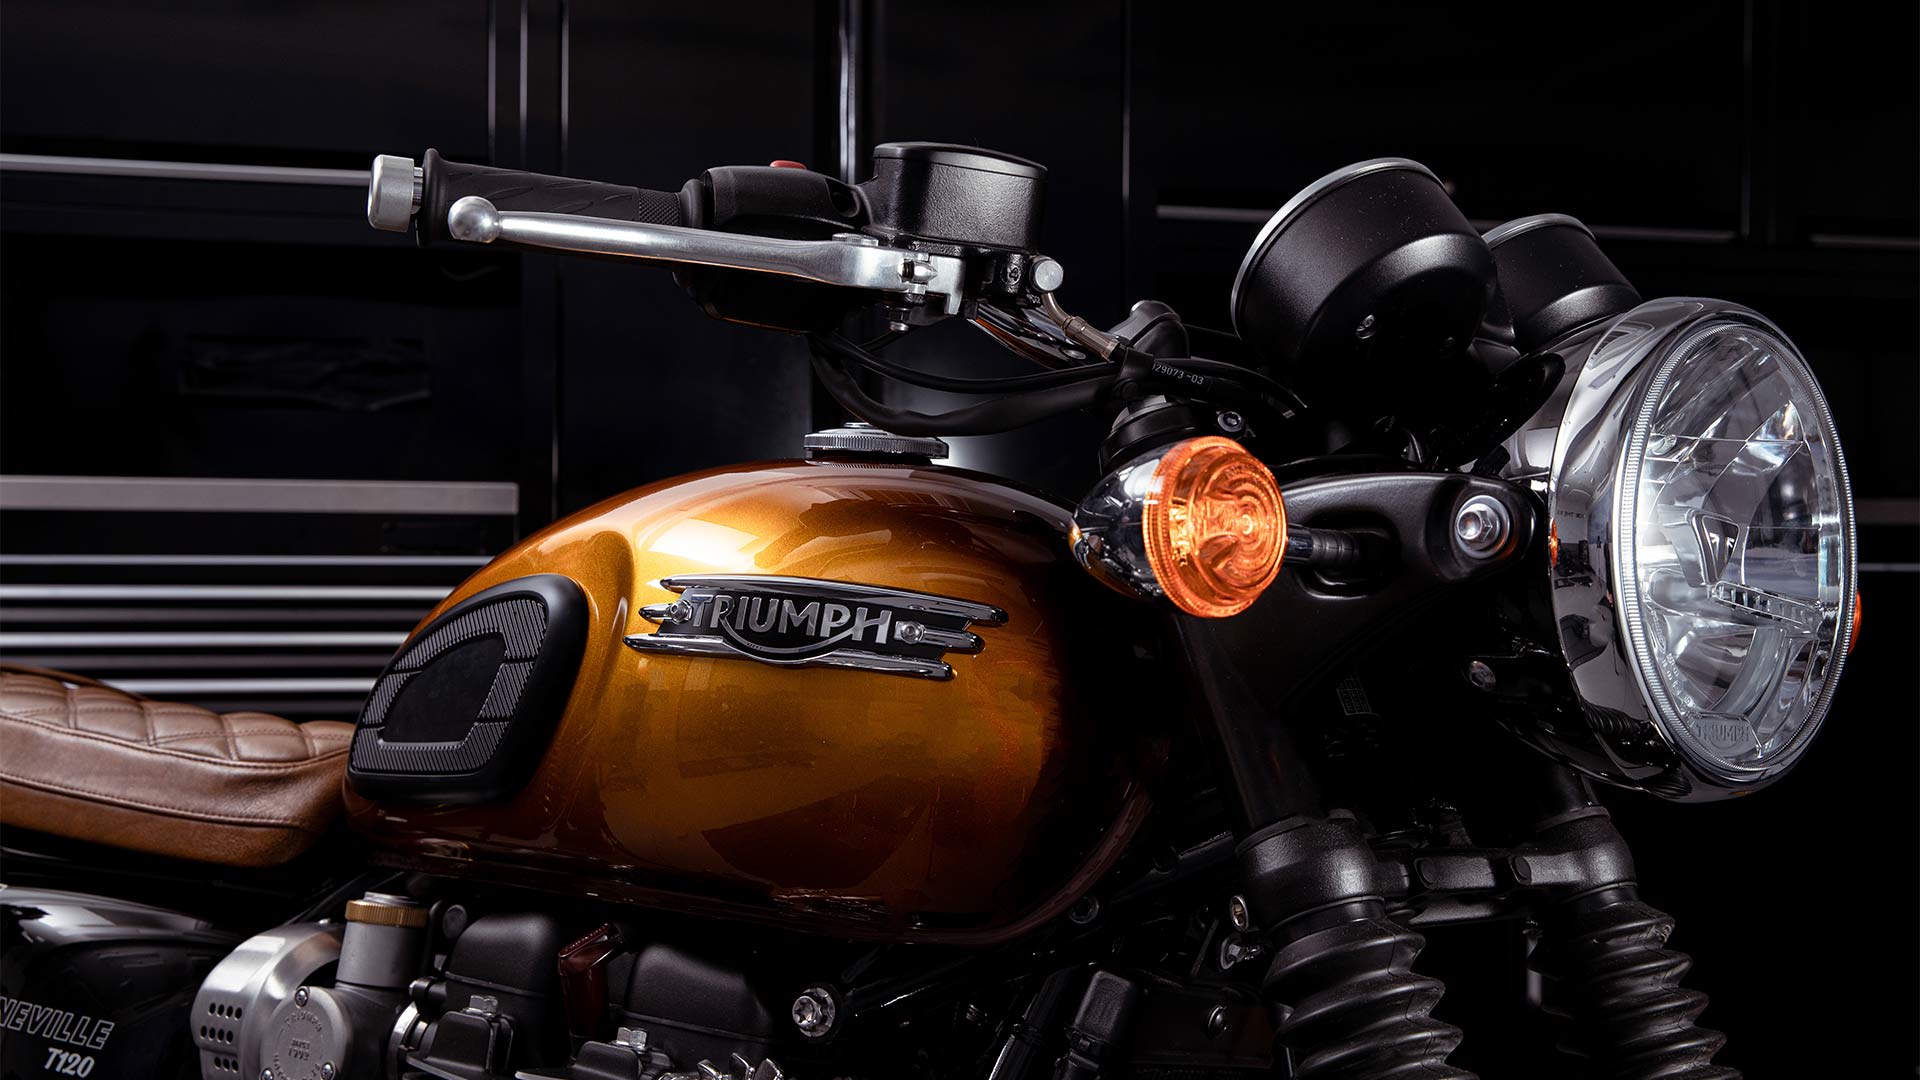 Gibson Guitar and Triumph Motorcycles Collaboration For The Distinguished Gentleman's Ride